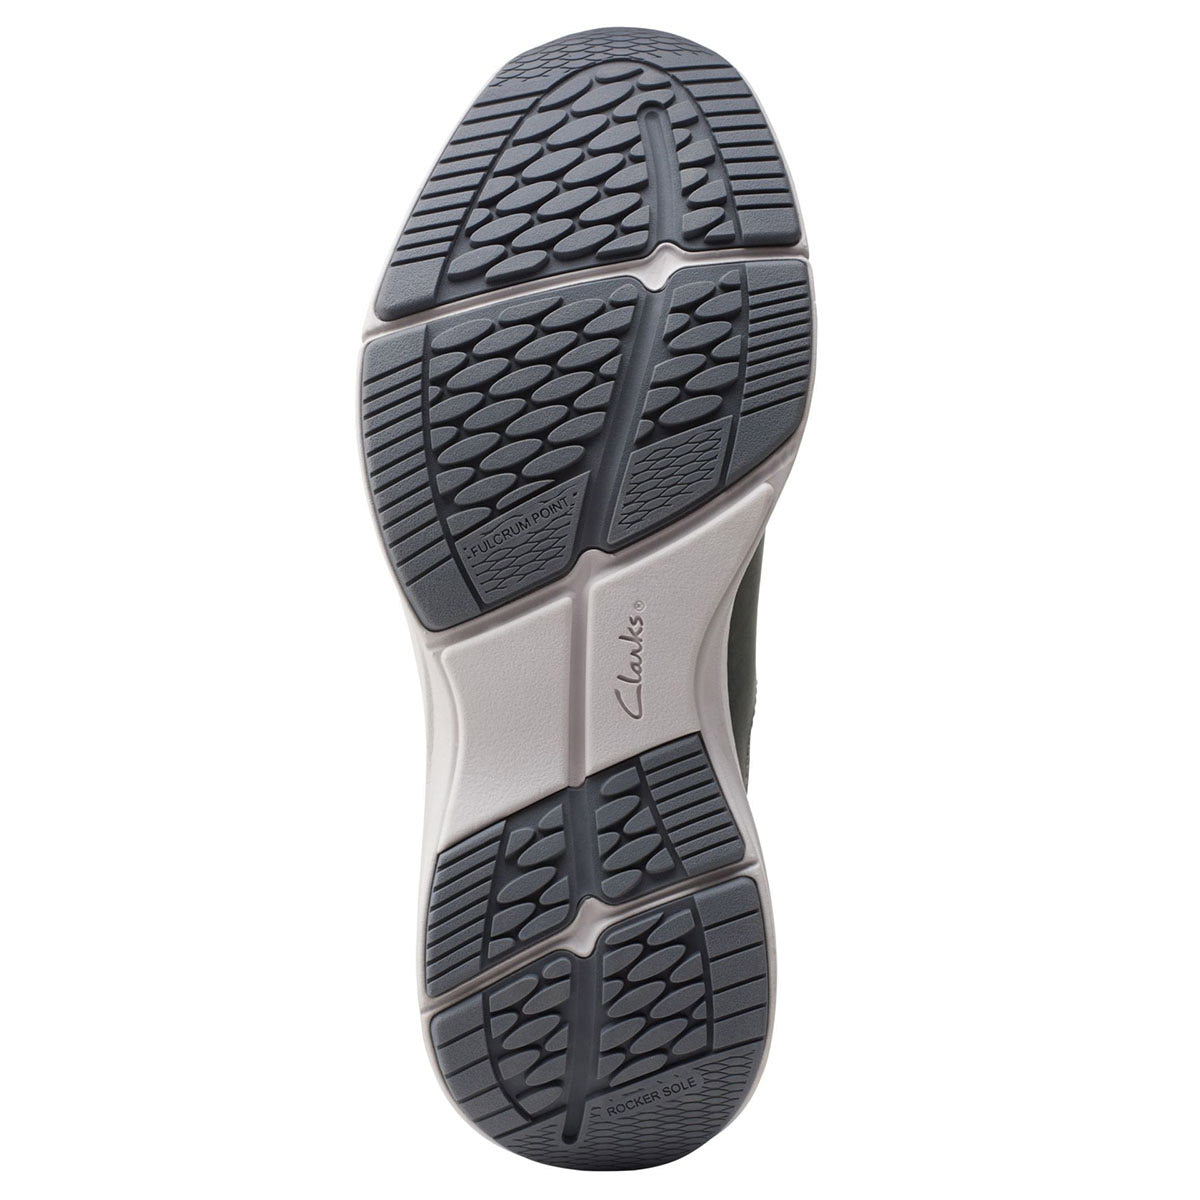 Tread pattern of a Clarks Wave 2.0 Vibe Grey - Mens shoe sole with branding detail.